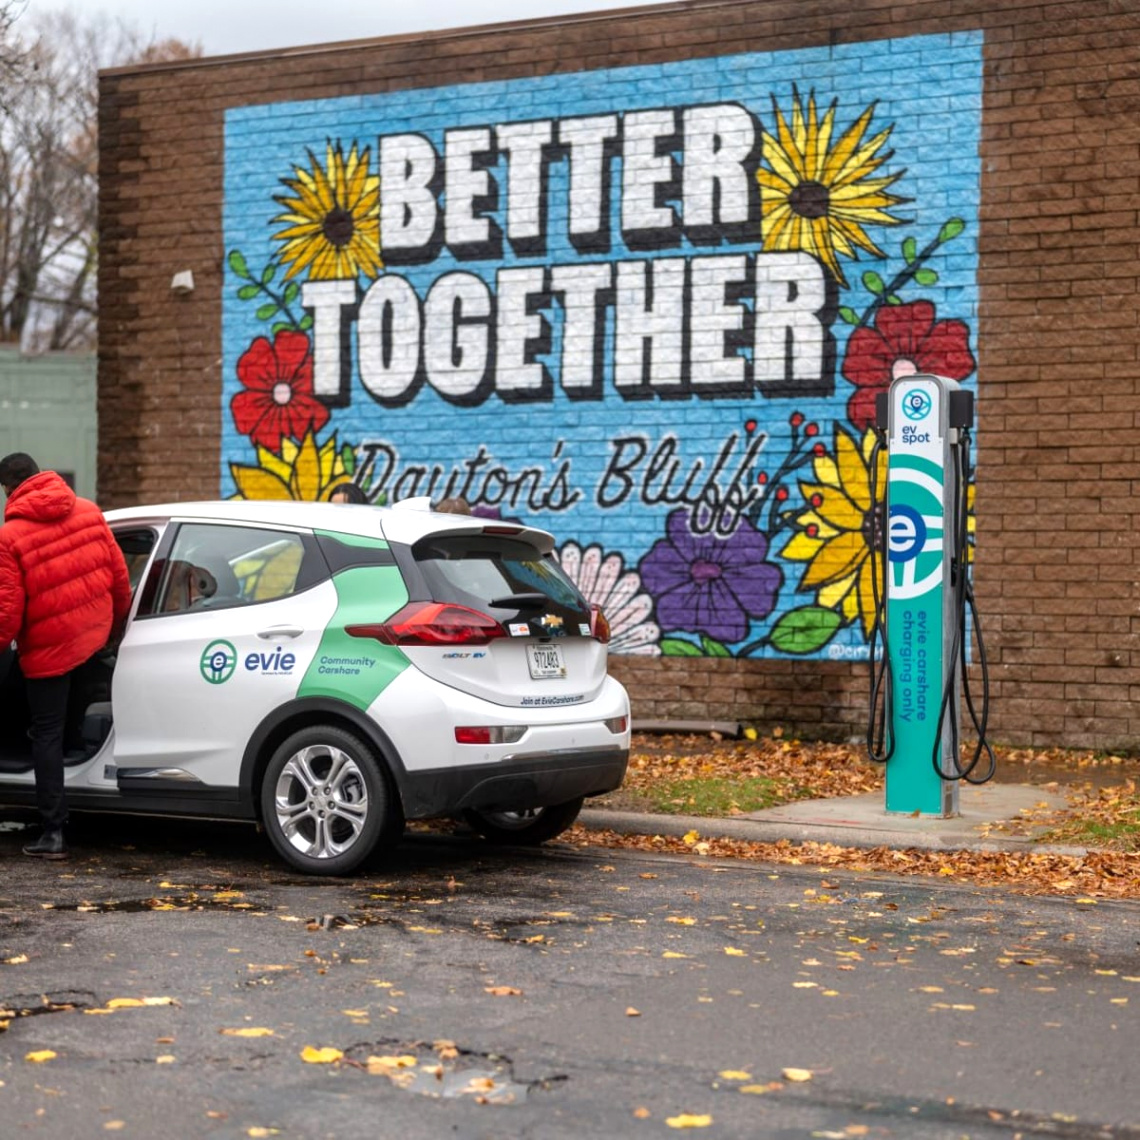 Car Rental software In Ramsey Mn Dans Twin Cities Launch New Electric Vehicle Car-share Program ...